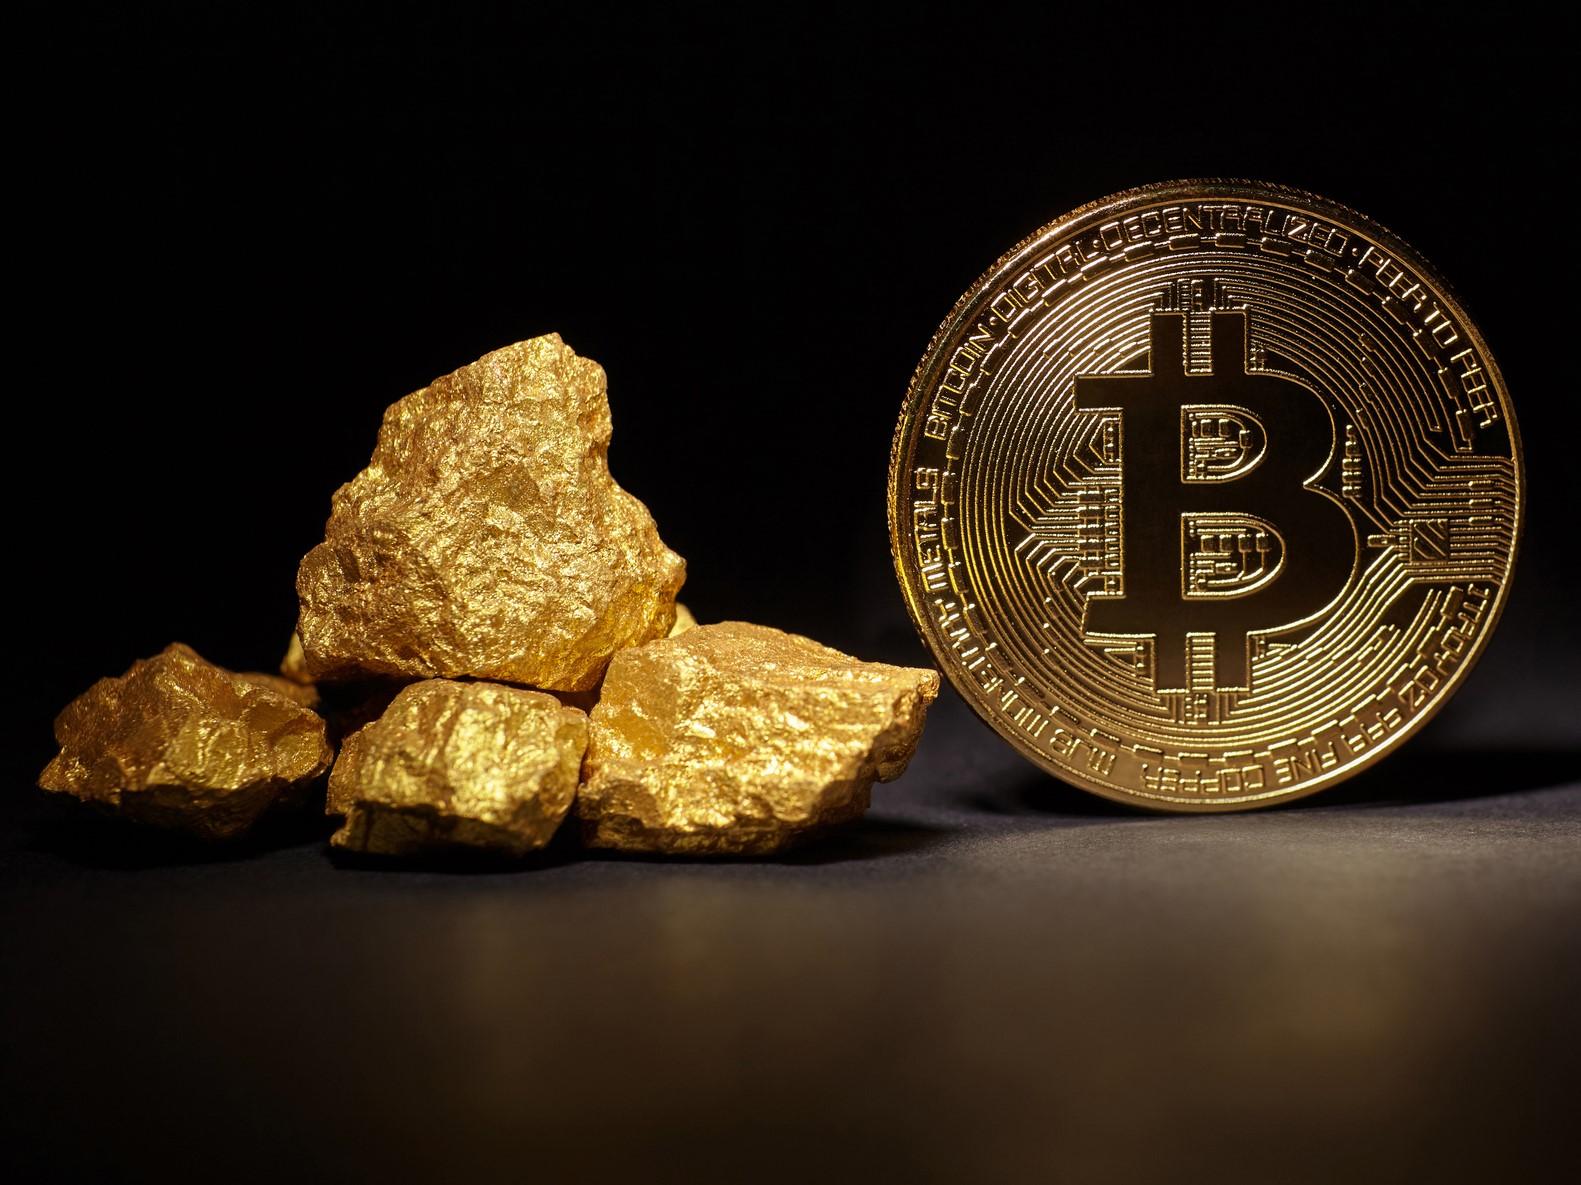 Bitcoin's recent price surge means it is now outperforming gold in 2020